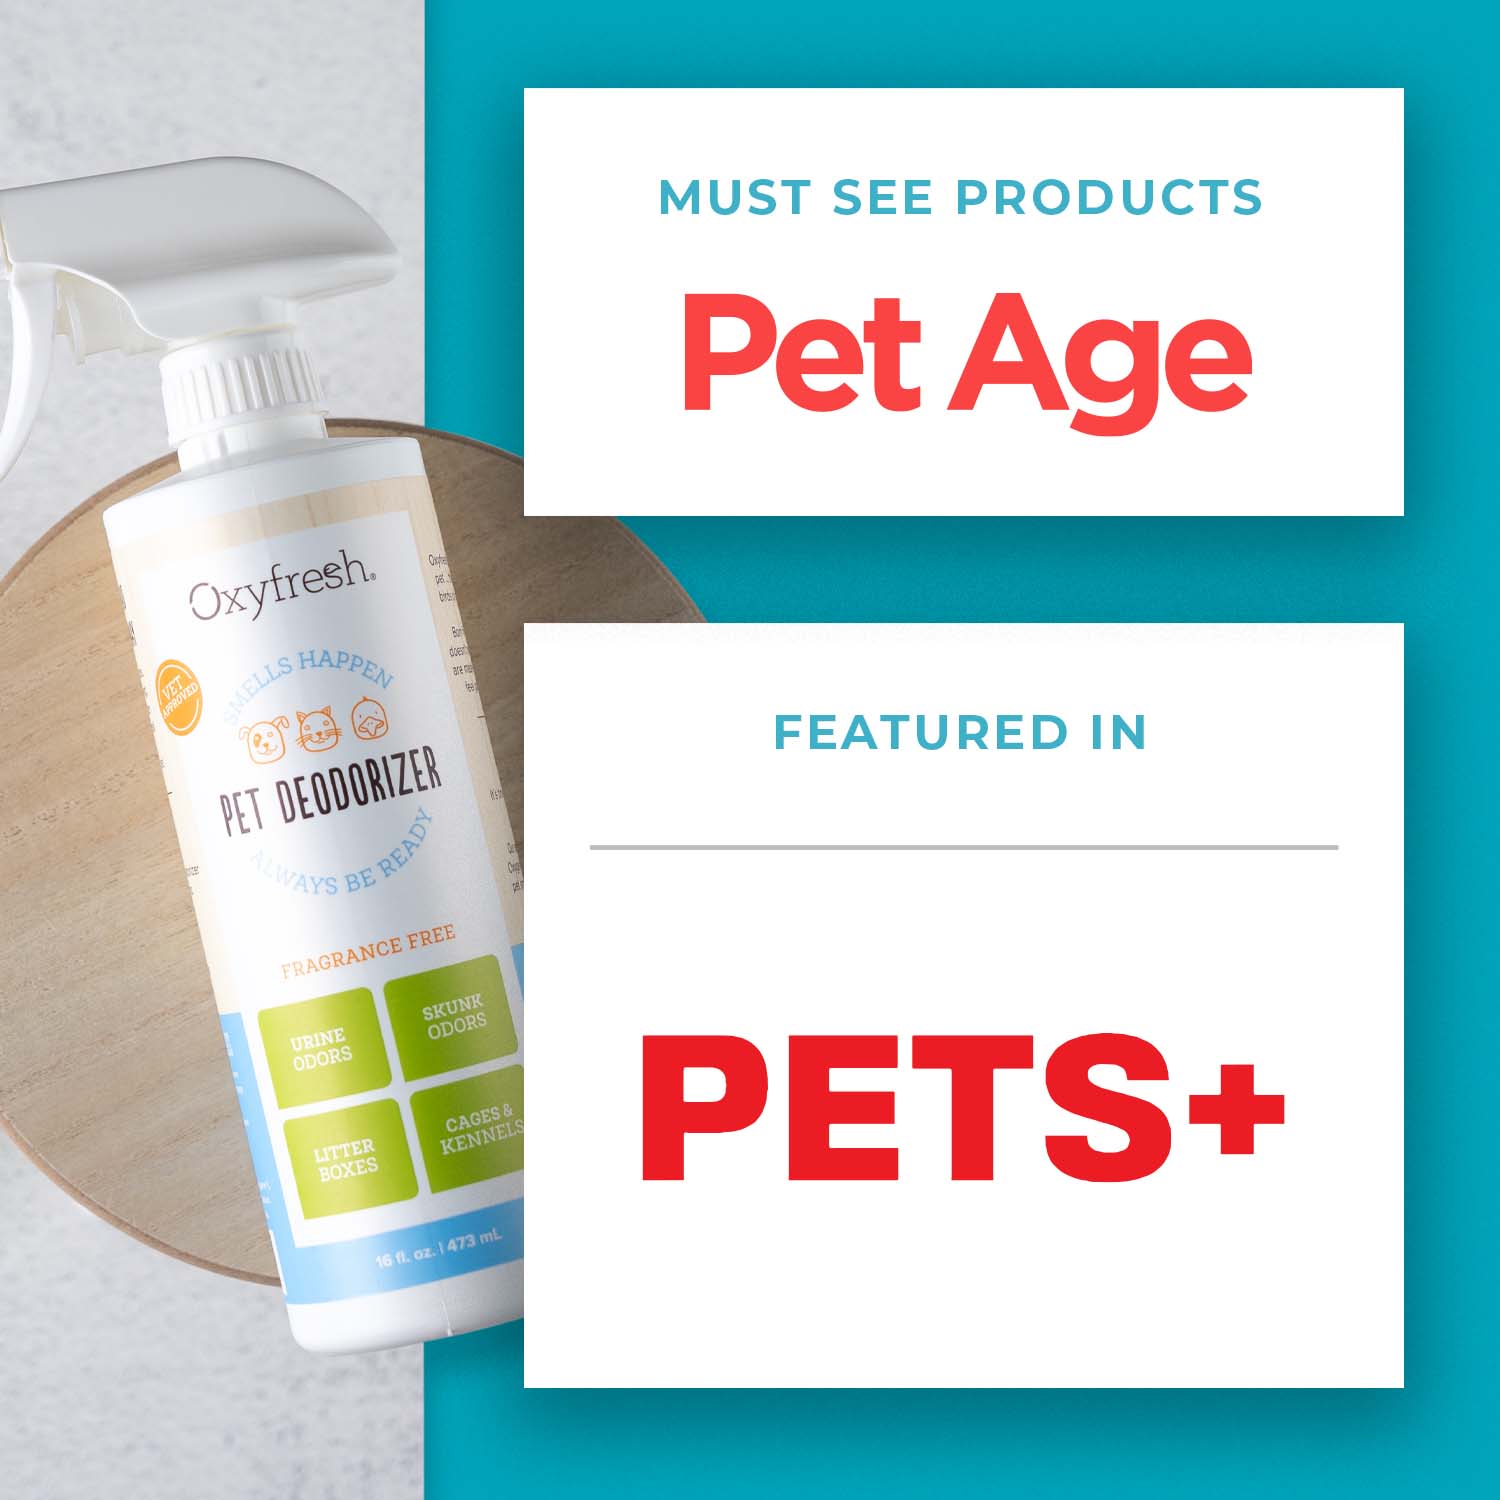 oxyfresh-pet-deodorizer-is-a-must-see-product-for-Pet-Age-and-is-featured-in-PETS+